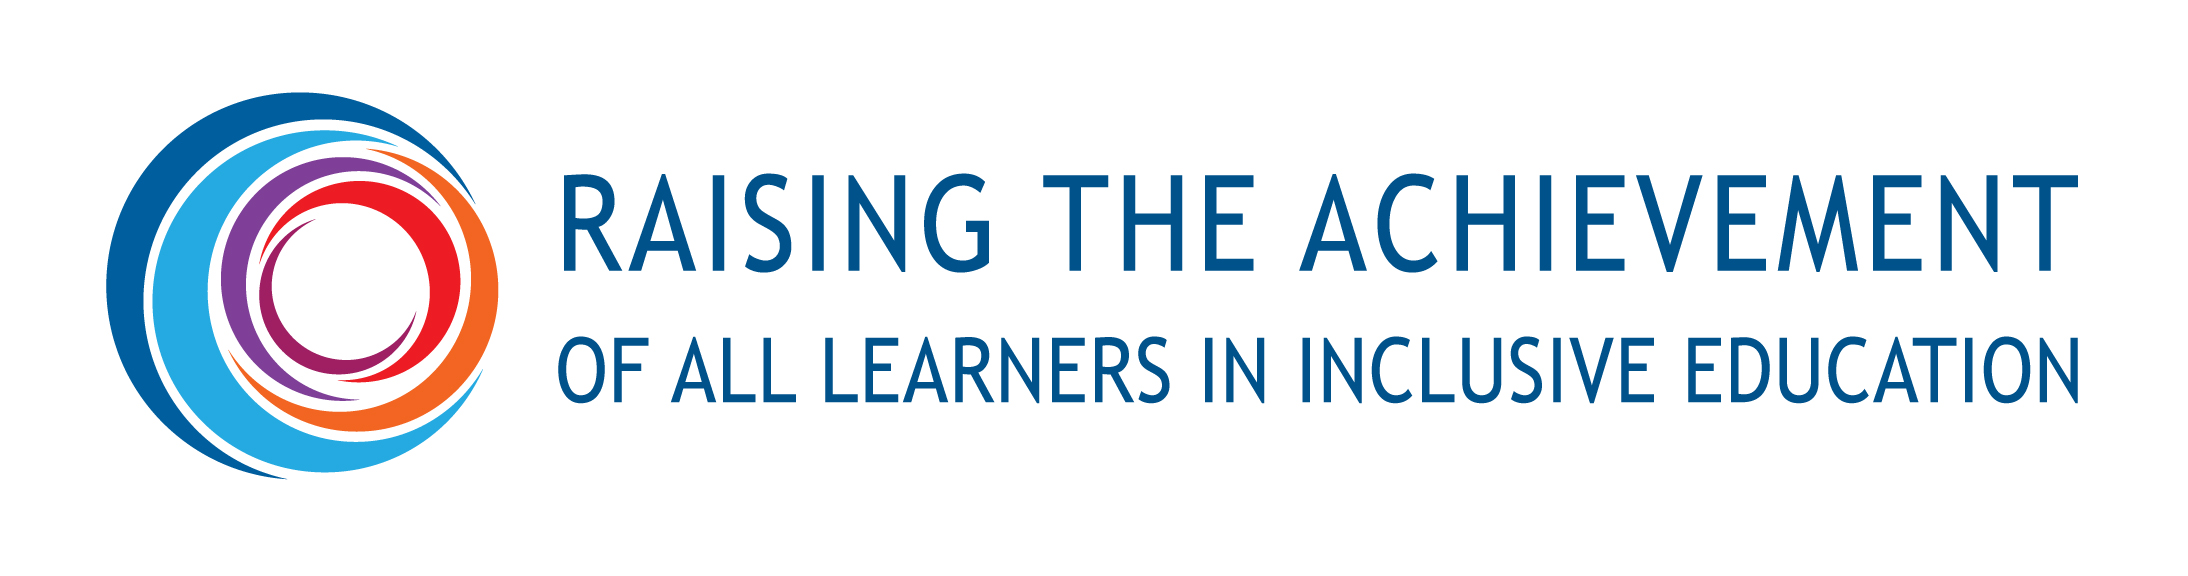 Raising the Achievement of all Learners in Inclusive Education – Project kick-off meeting